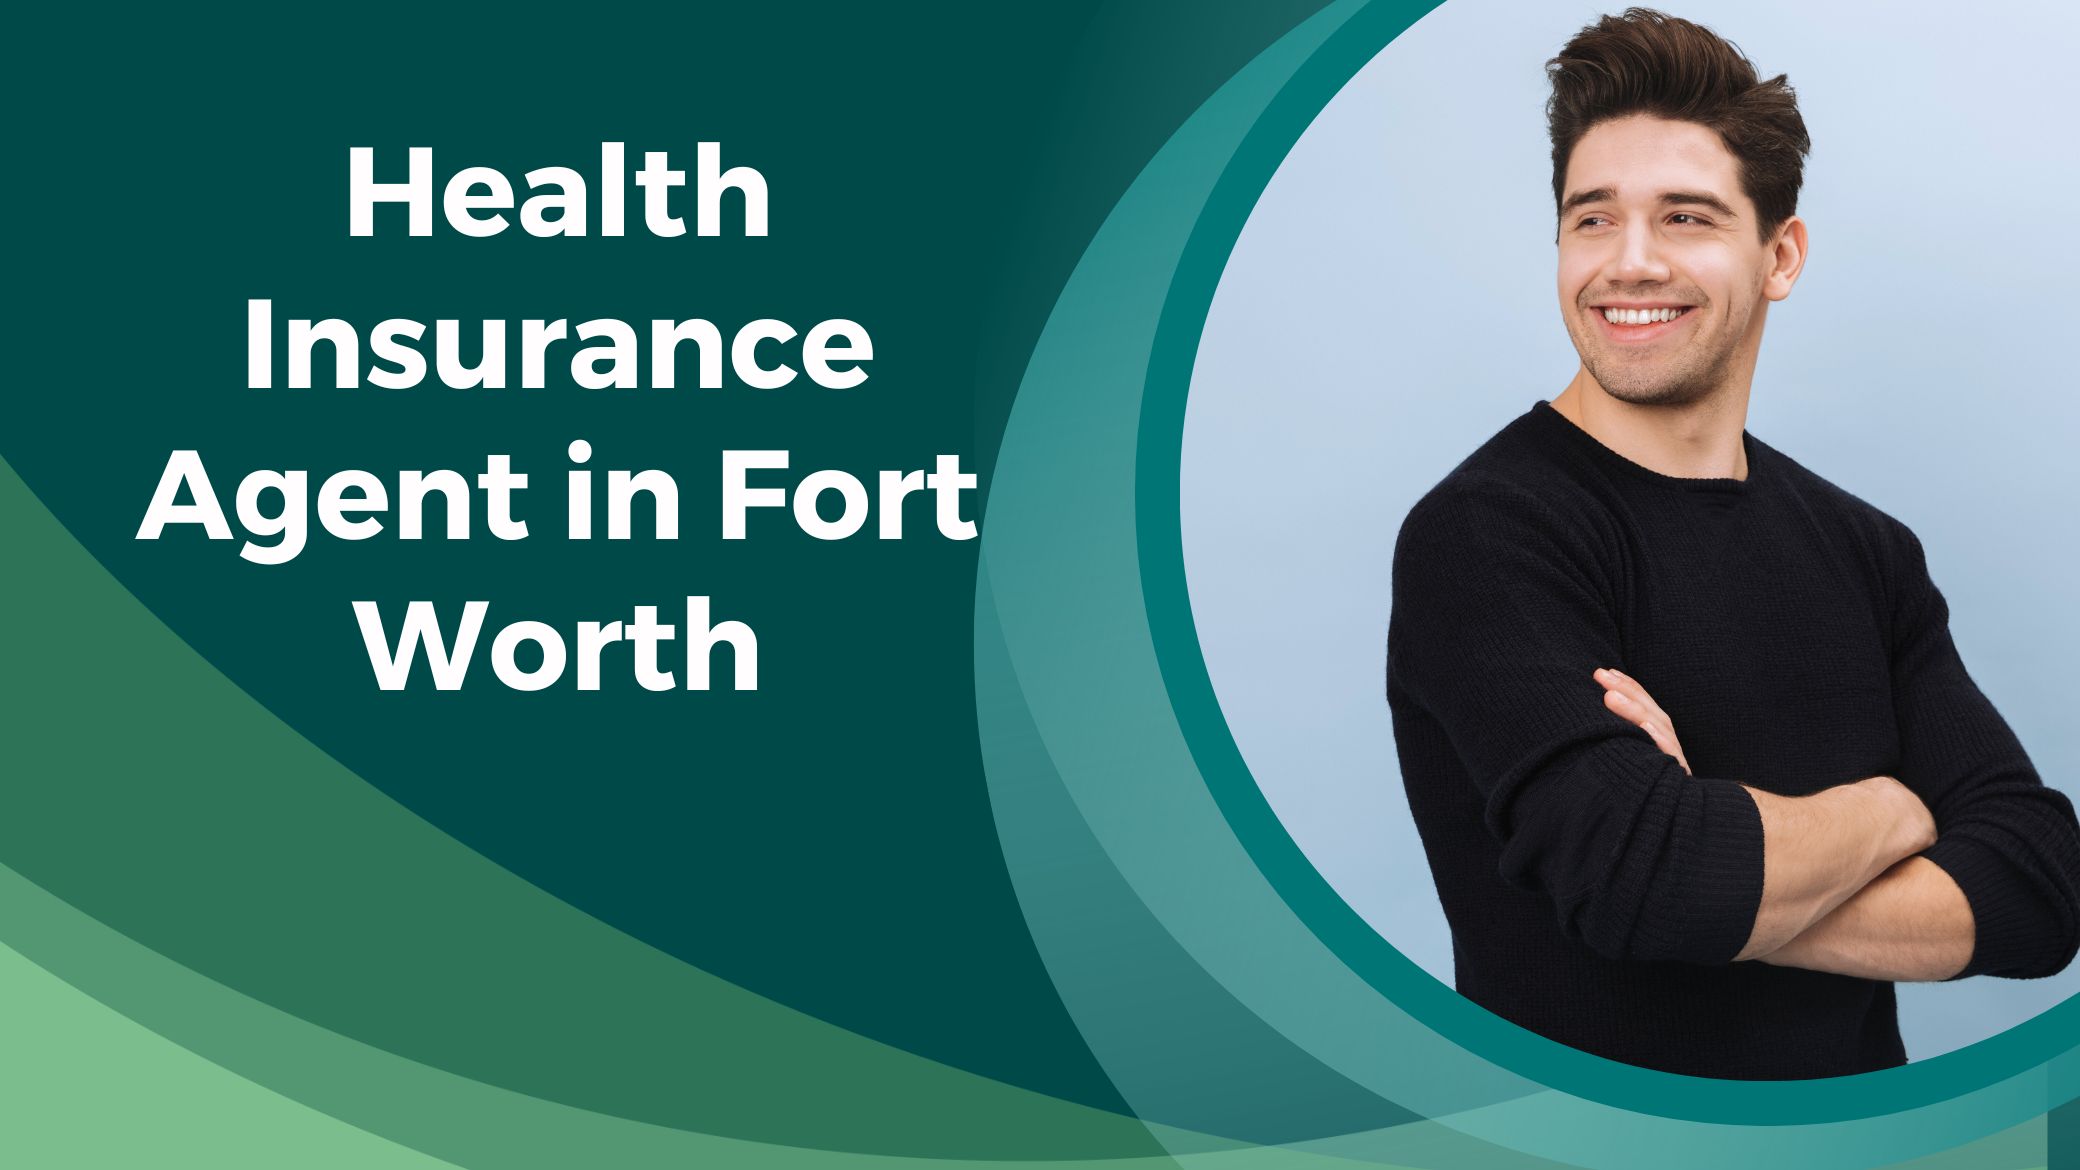 Health Insurance Agent in Fort Worth